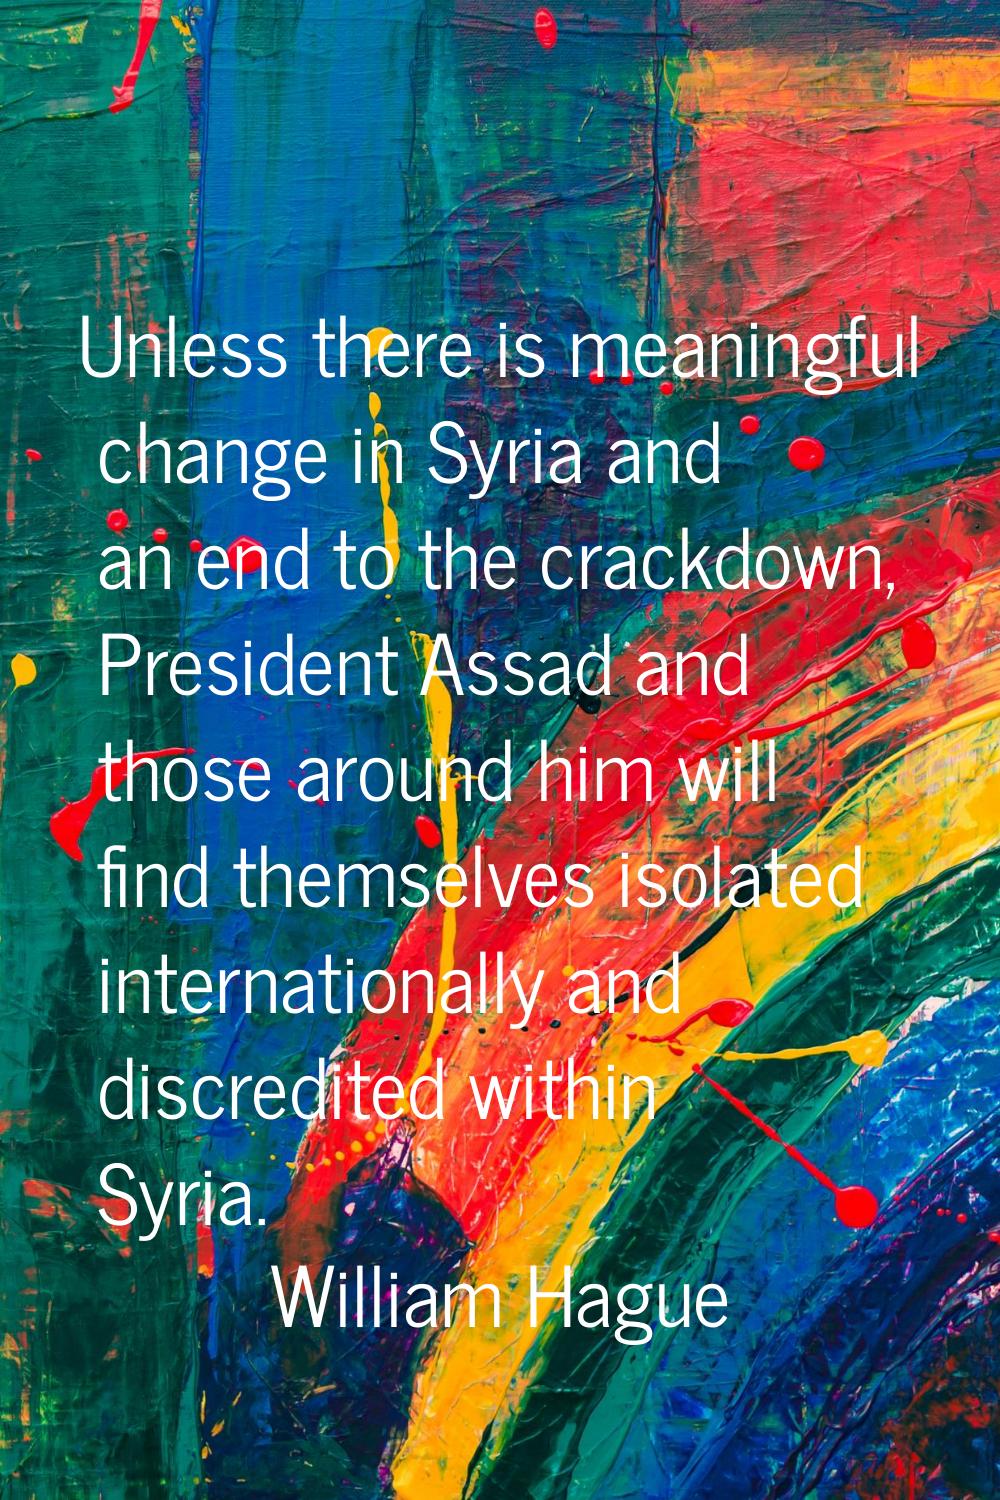 Unless there is meaningful change in Syria and an end to the crackdown, President Assad and those a